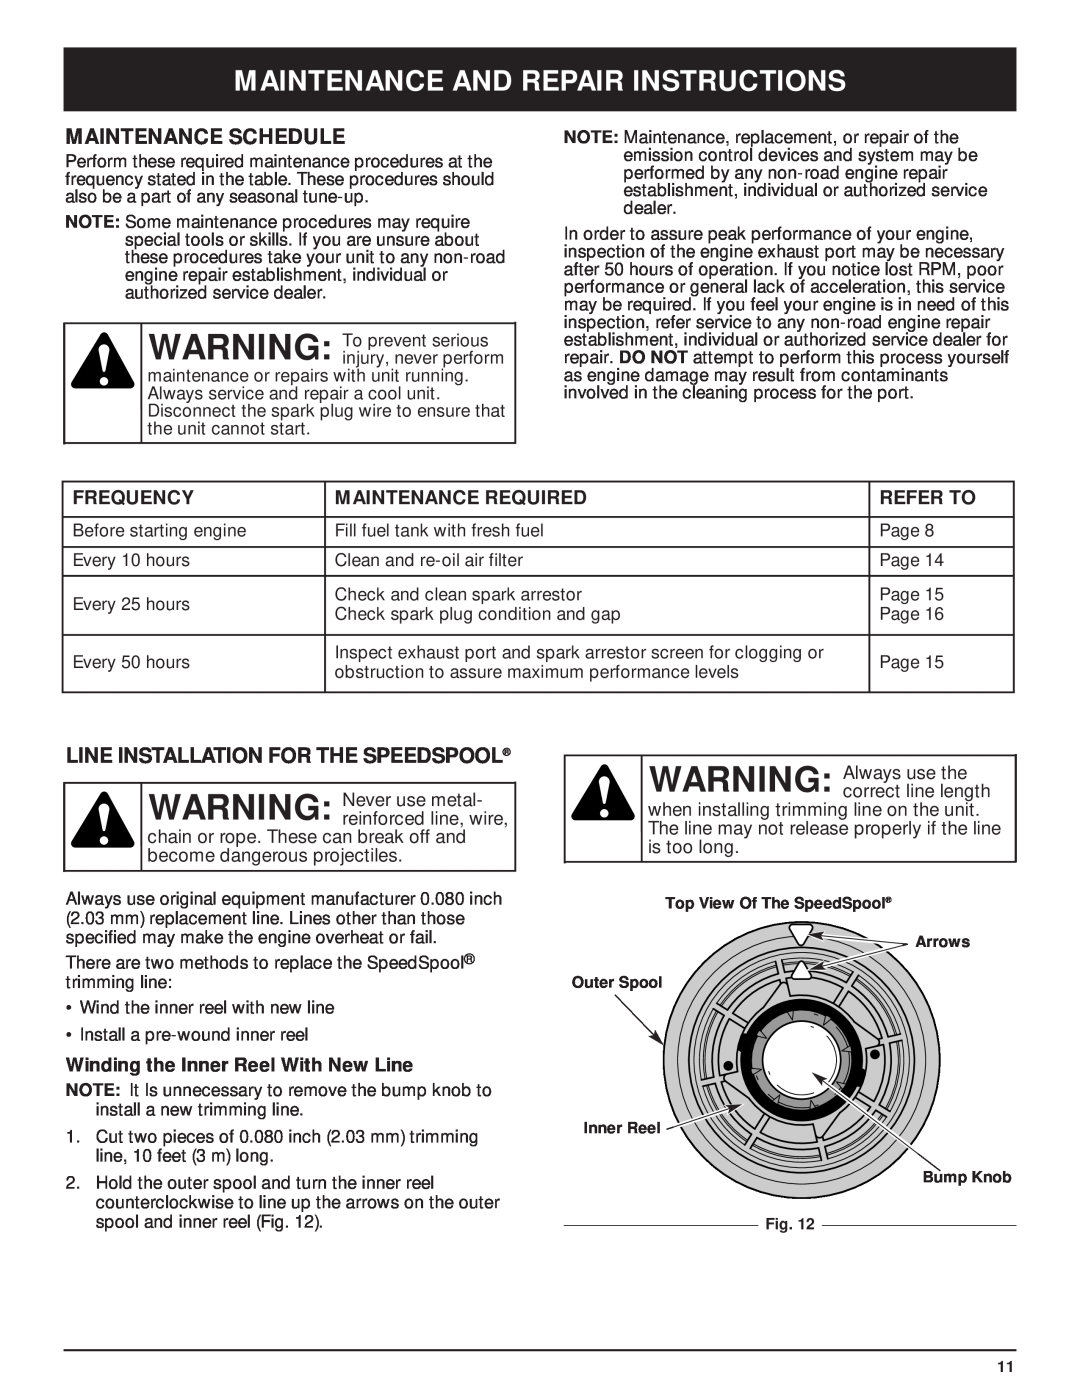 McCulloch MT705 Maintenance And Repair Instructions, Maintenance Schedule, Line Installation For The Speedspool, Frequency 